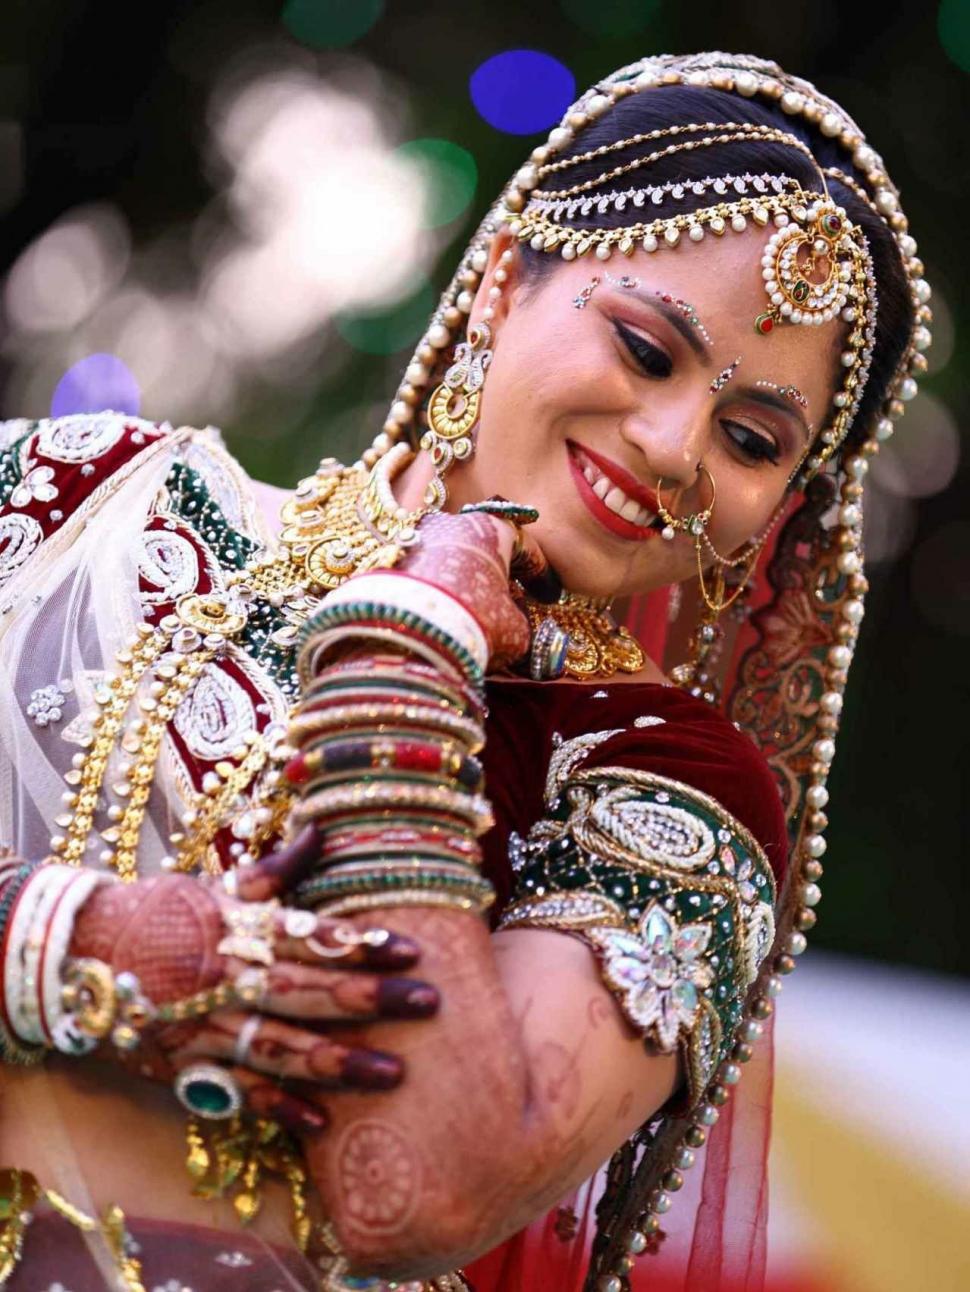 Free Image of Woman in Traditional Indian Garb and Jewelry 